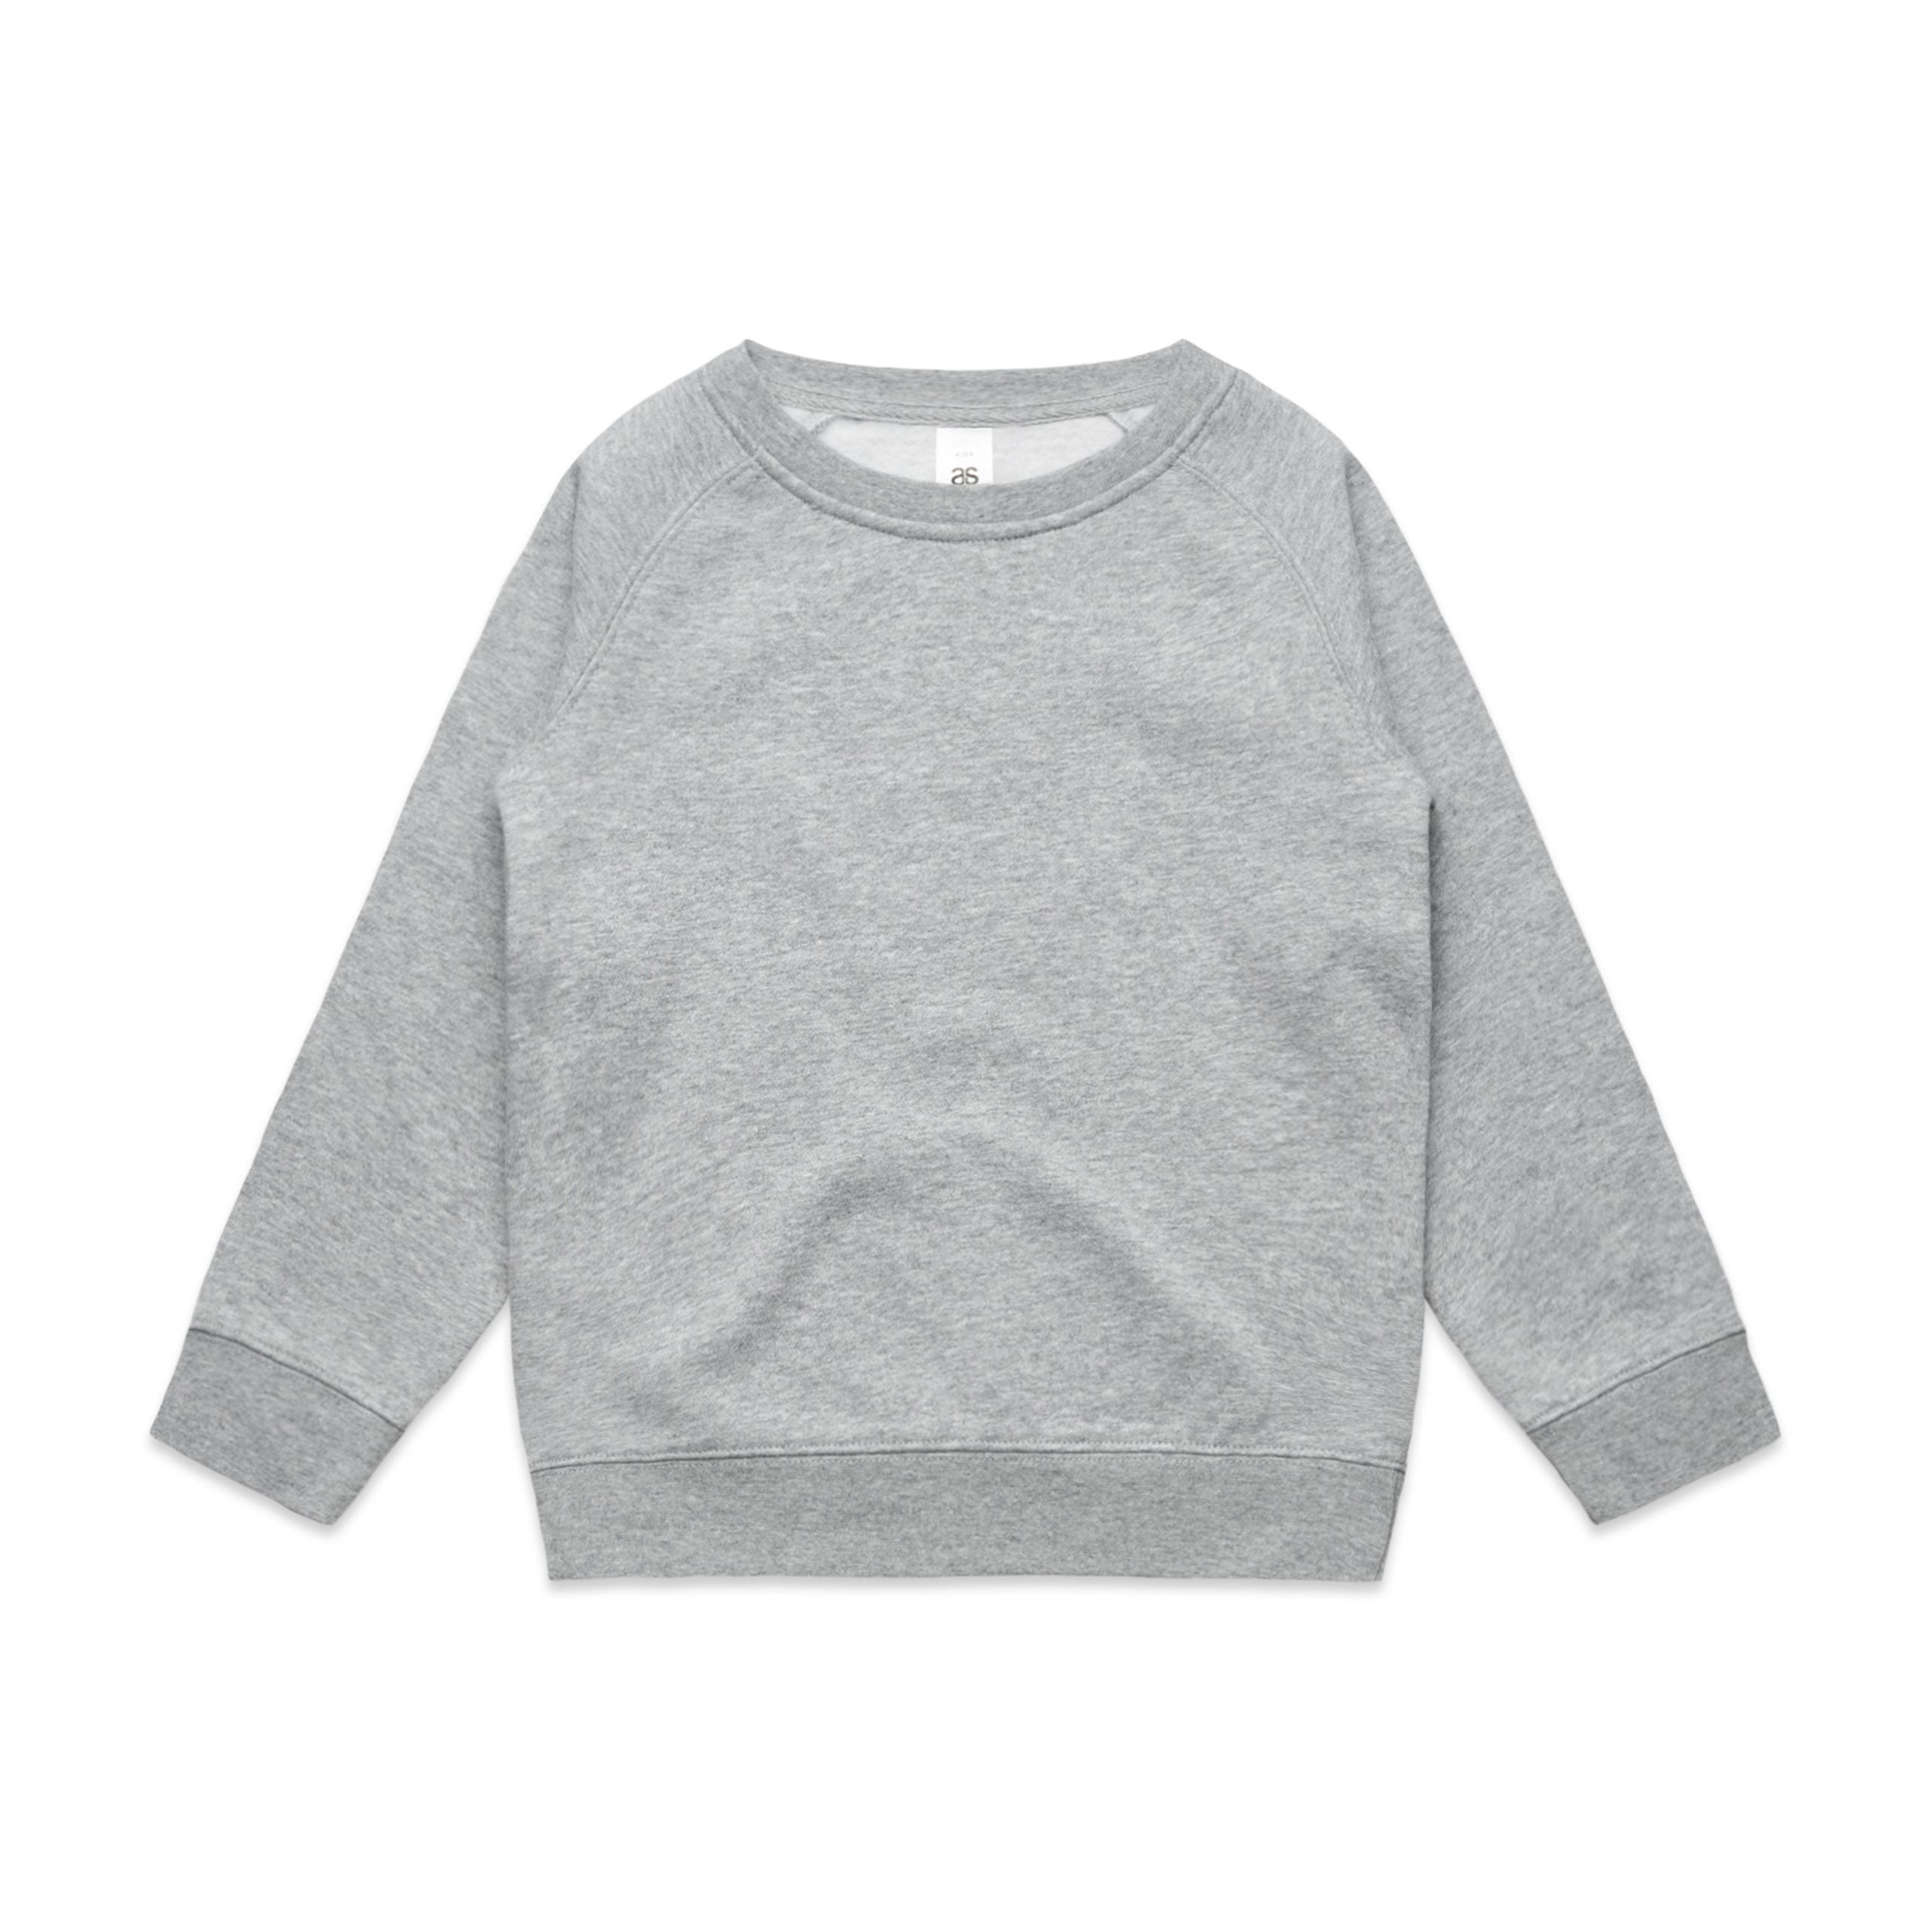 3031_AS_Youth-Supply-Crew_Grey-Marle-scaled